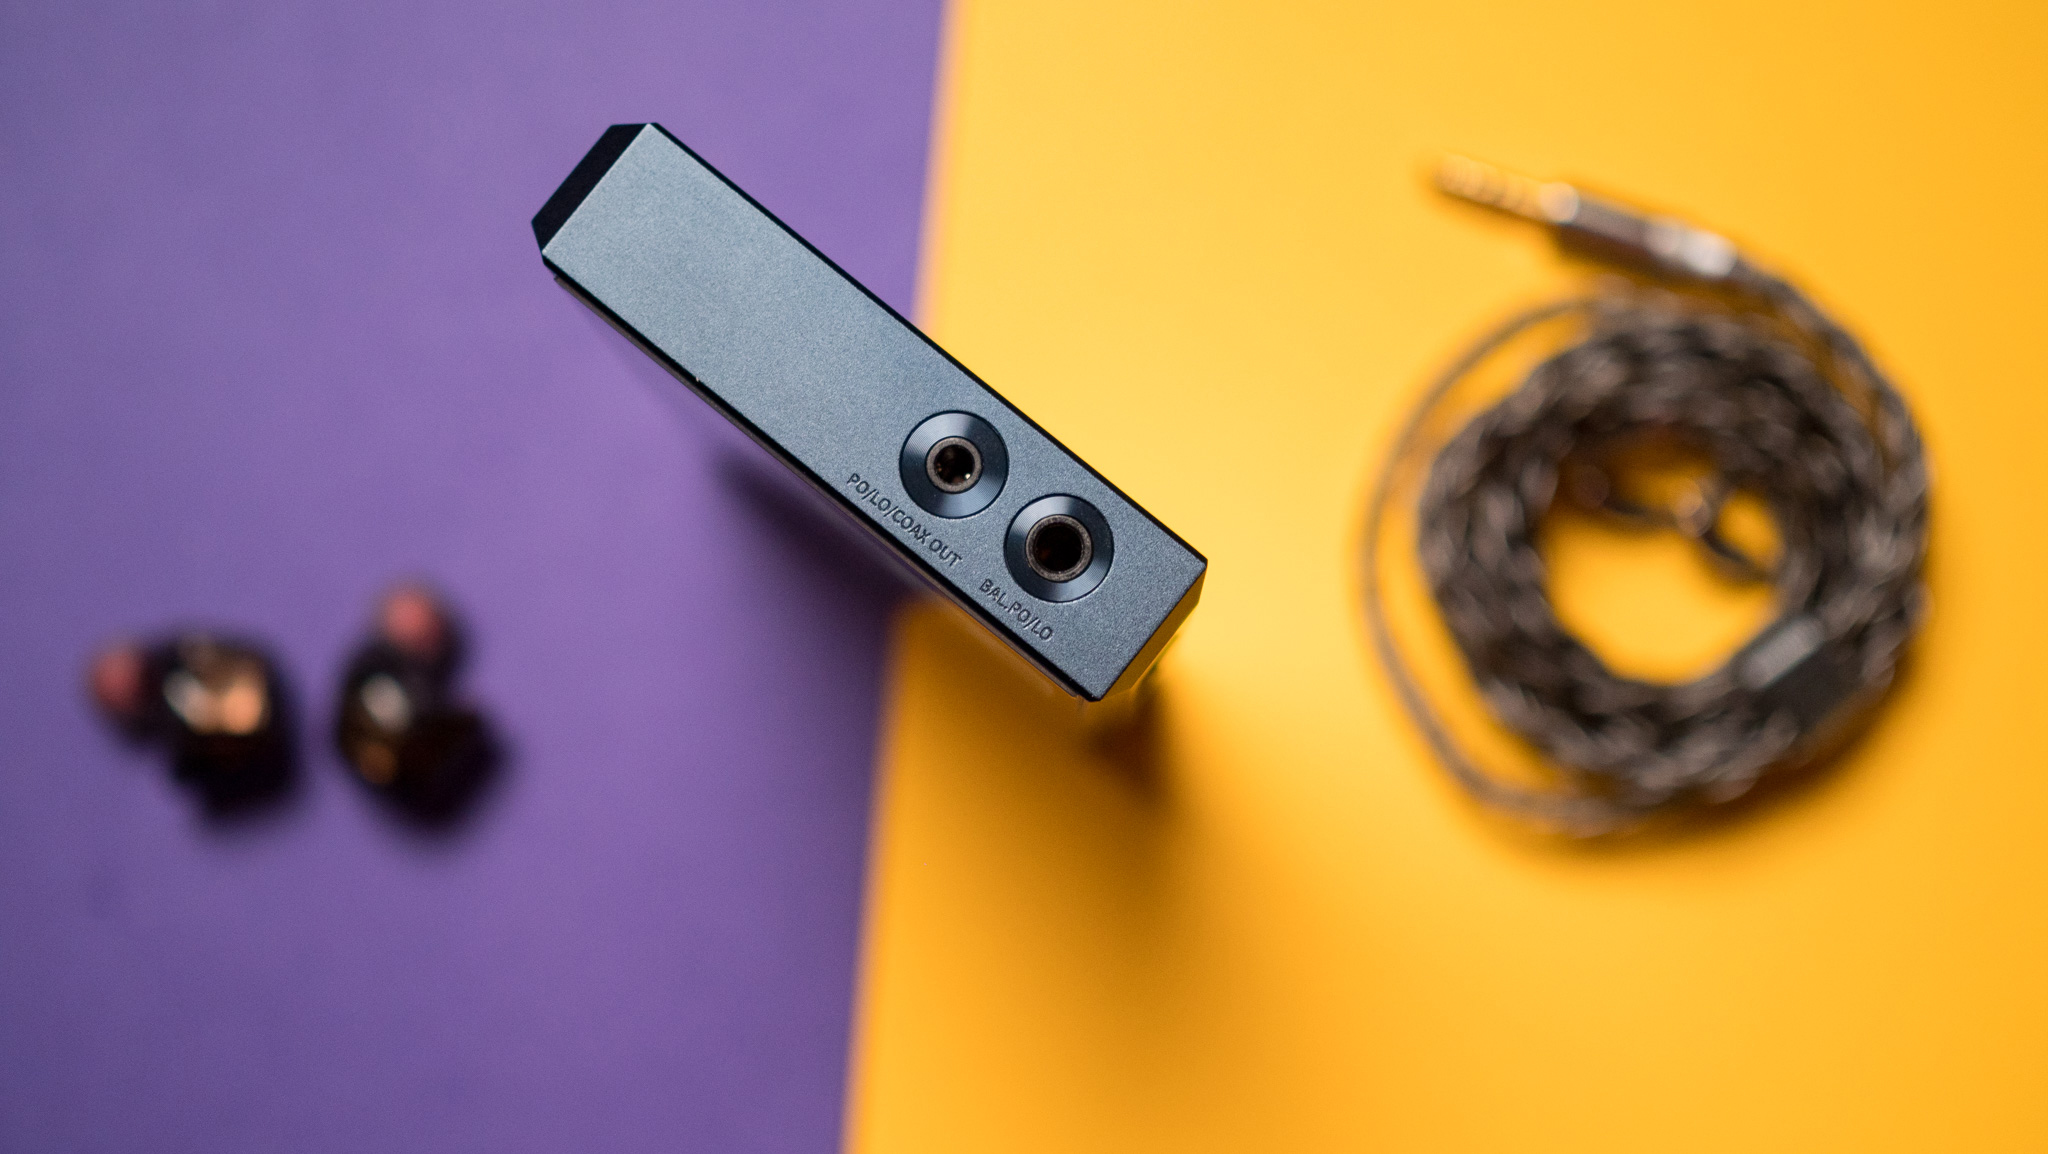 Fiio M23 has 3.5mm and 4.4mm connectivity